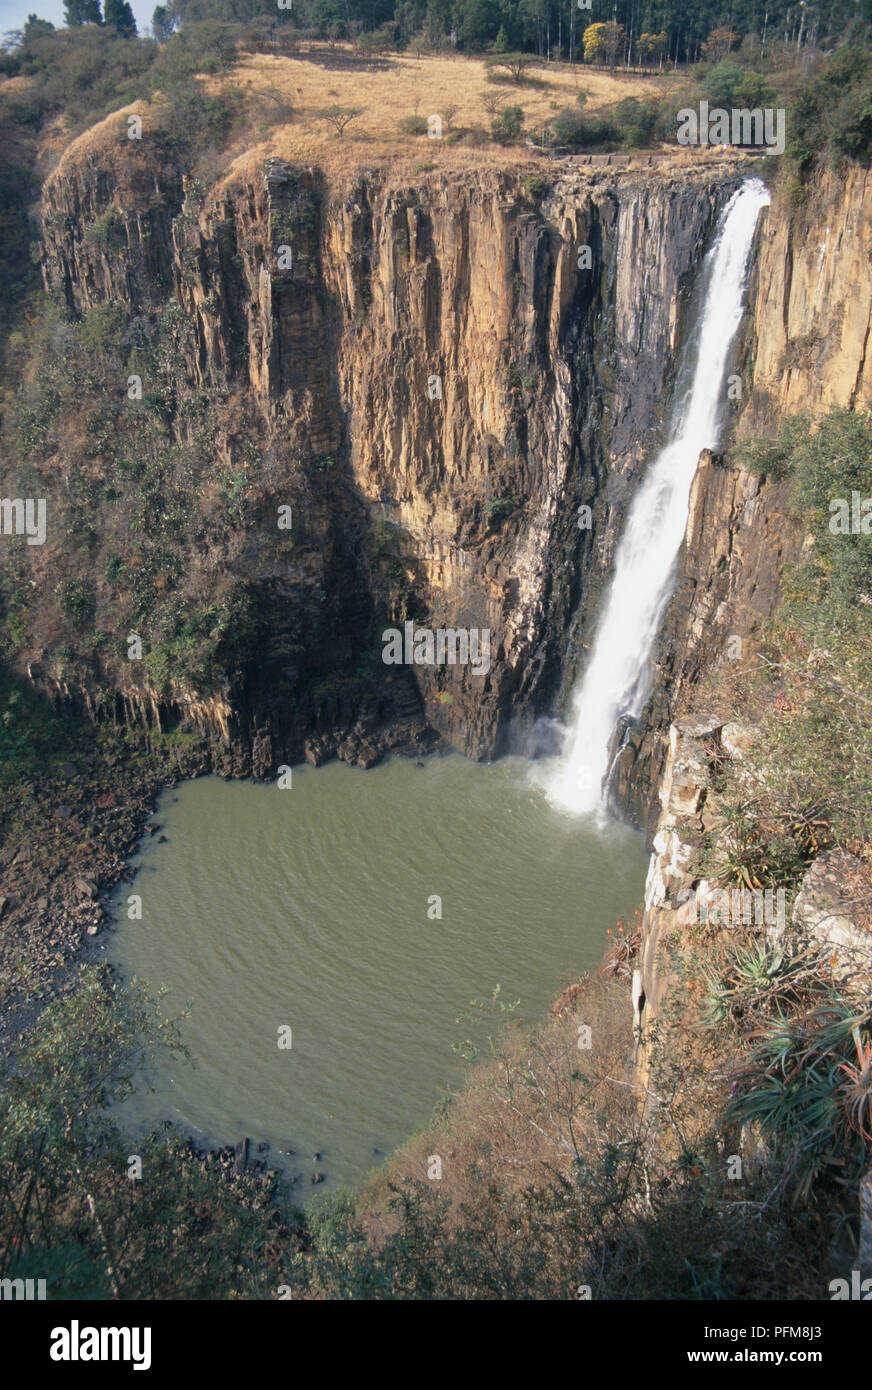 South Africa, Kwazulu-Natal, Howick Falls, elevated view Stock Photo